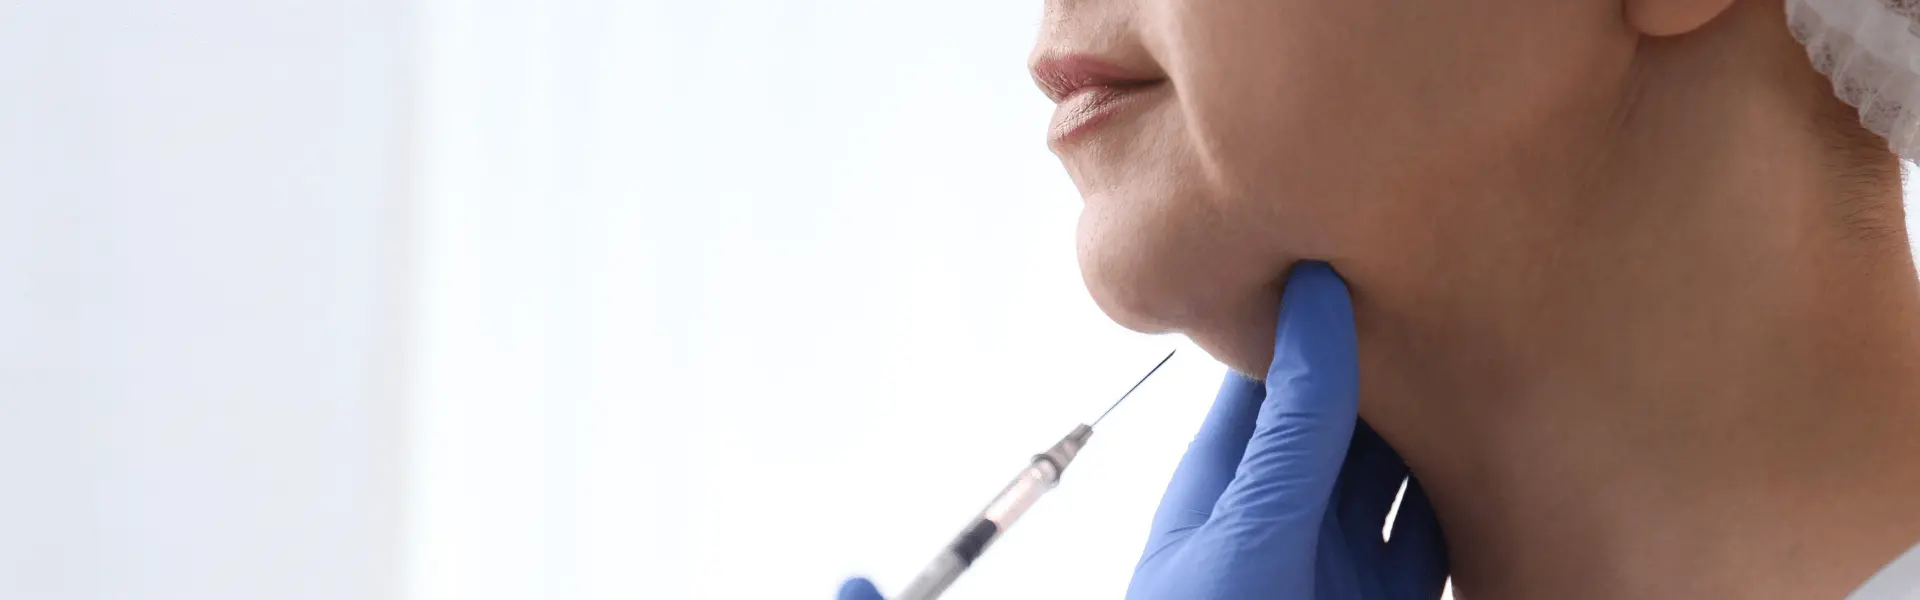 A woman's neck is being injected with a syringe.